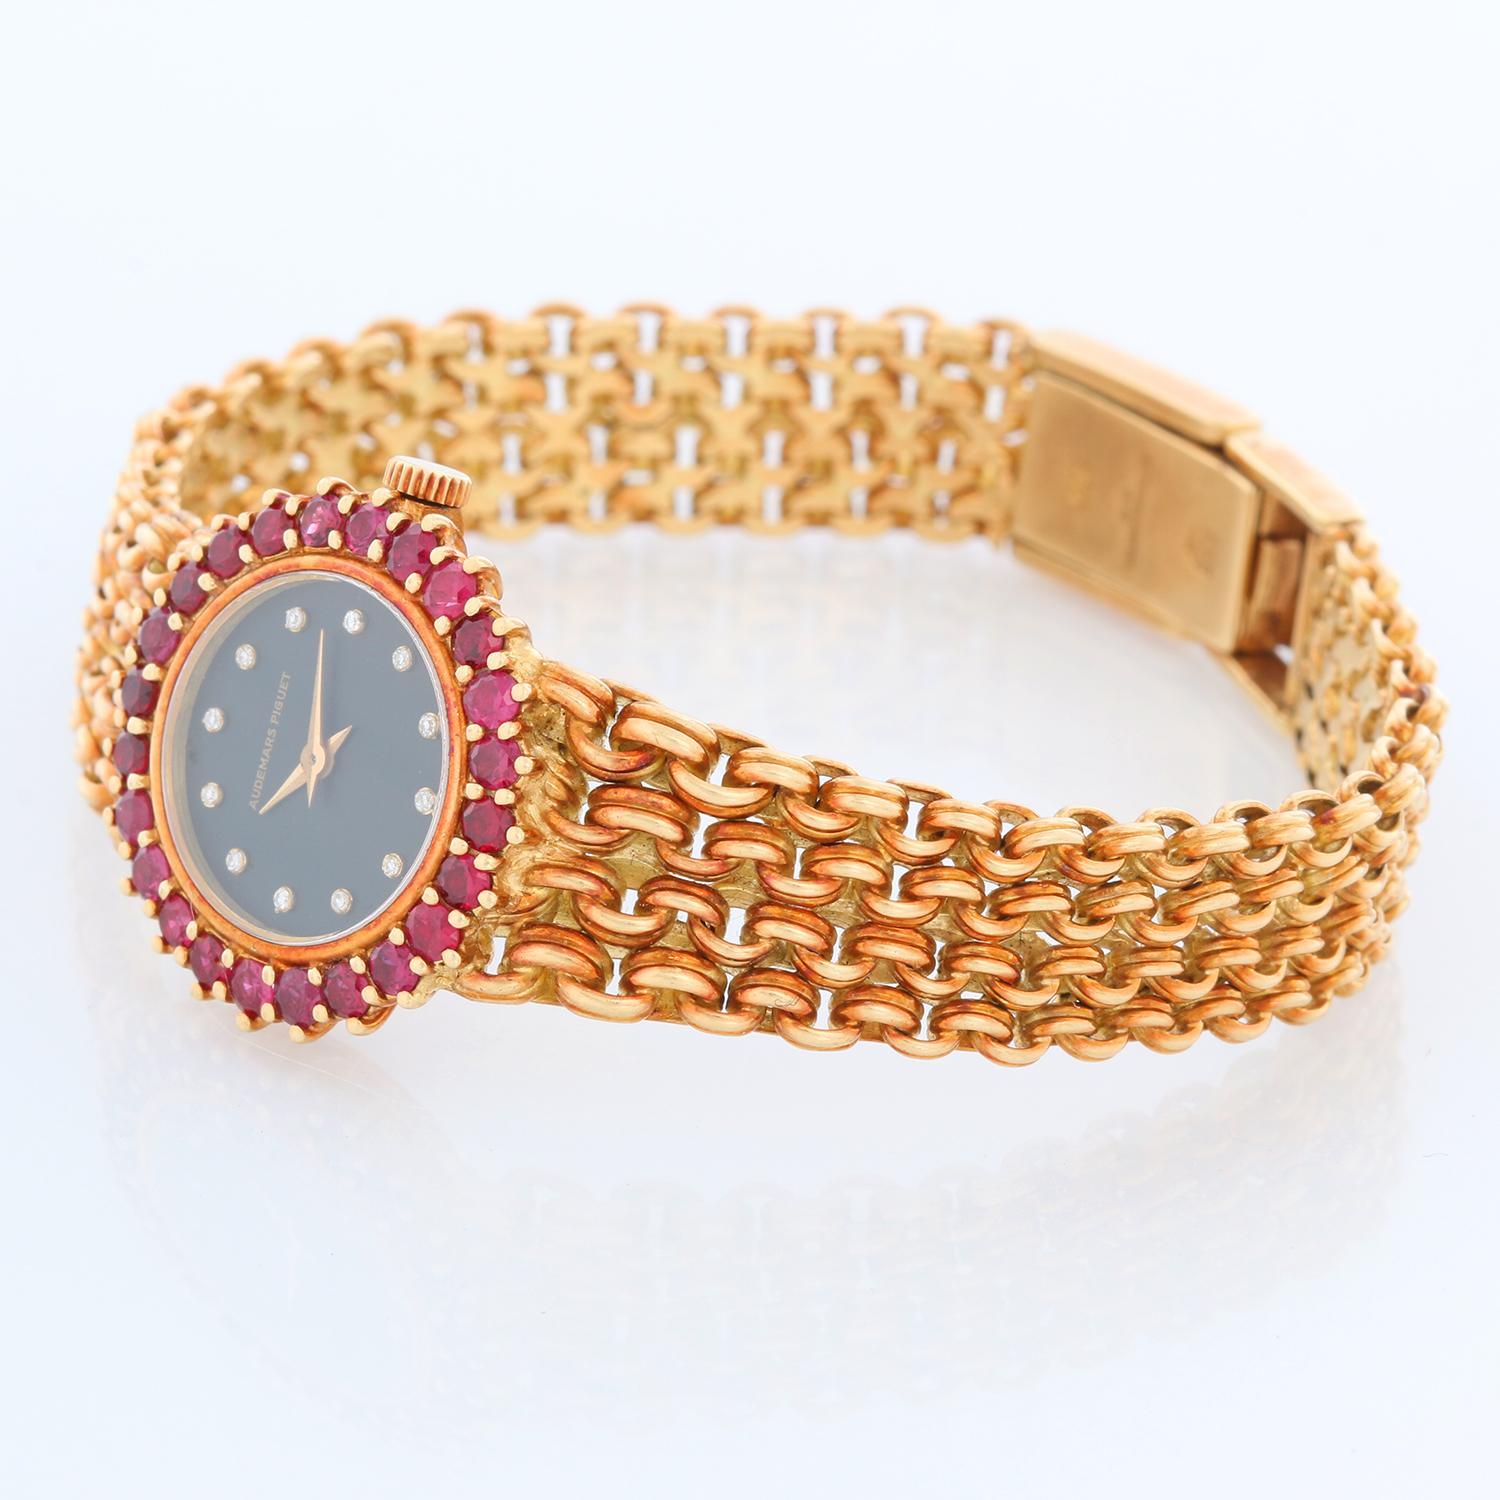 Vintage Audemars Piguet 18K Yellow Gold Ladies Watch - Manual winding. 18K Yellow gold case with a ruby bezel (22 mm) . Black dial with diamond hour markers. 18K Yellow gold bracelet. Will fit up to a 6 1/2 inch wrist.  Pre-owned with Audemars